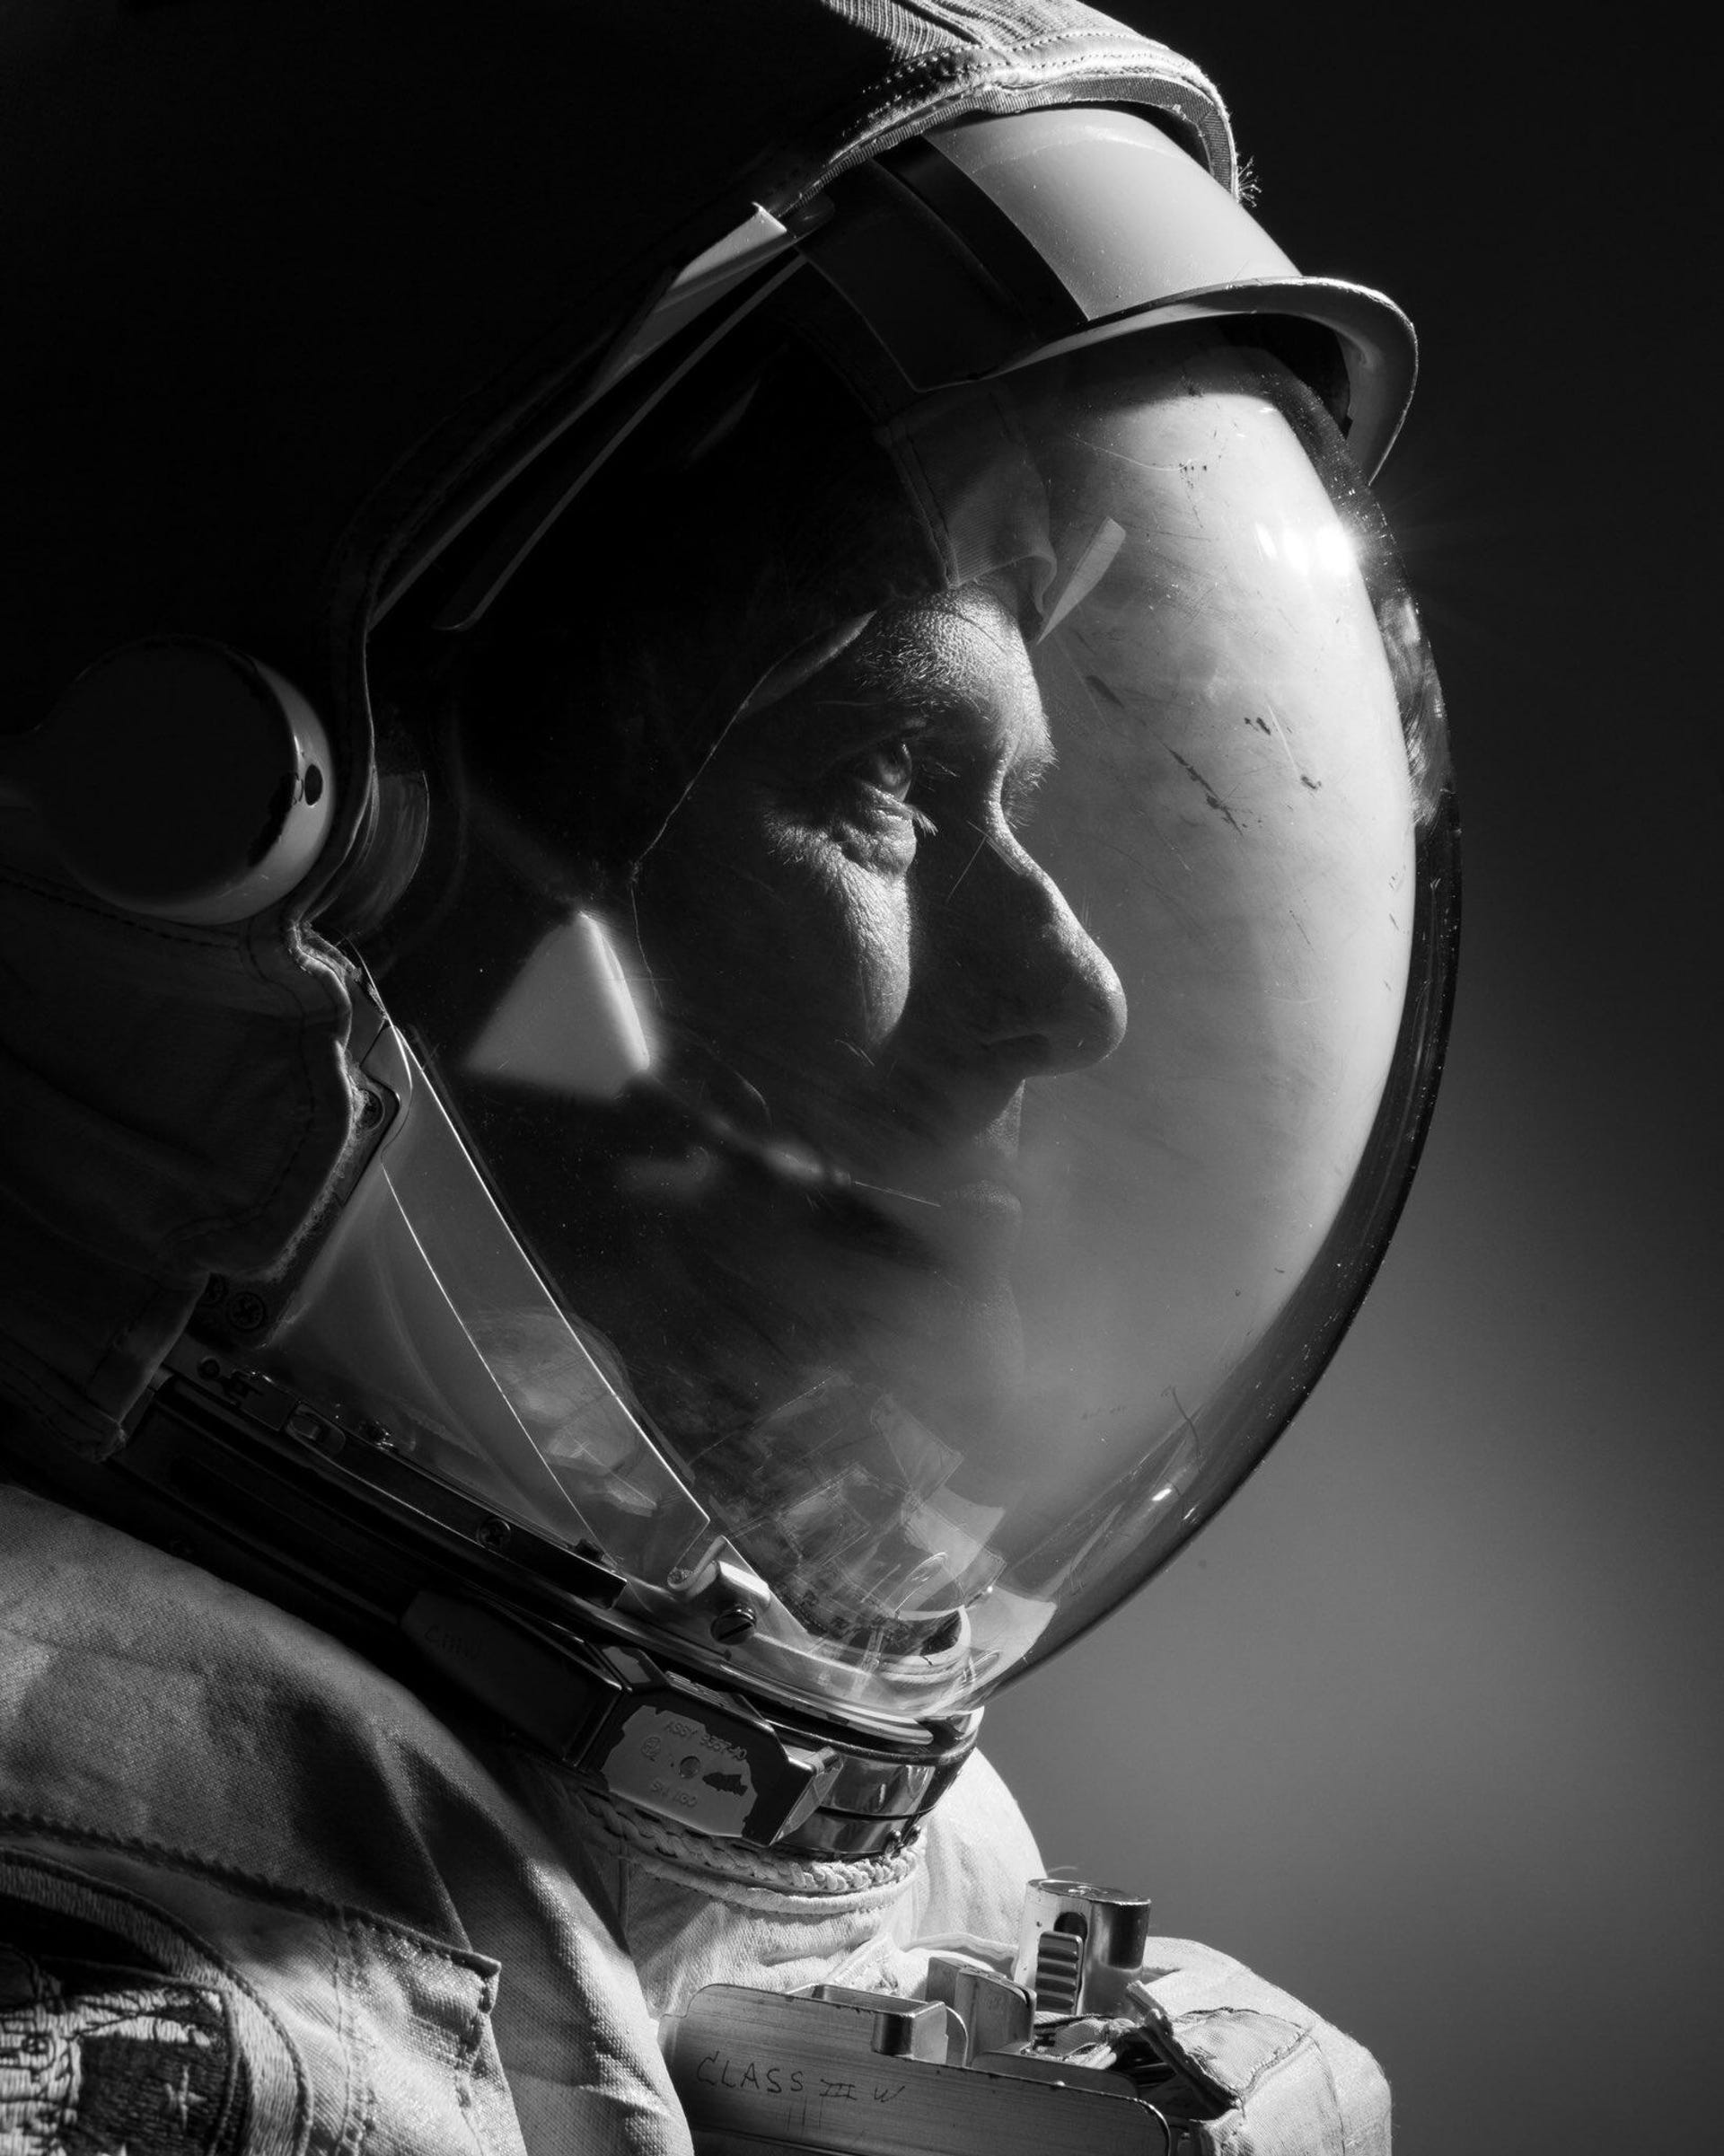 Sideways portrait of astronaut in a spacesuit with light shining through the helmet.